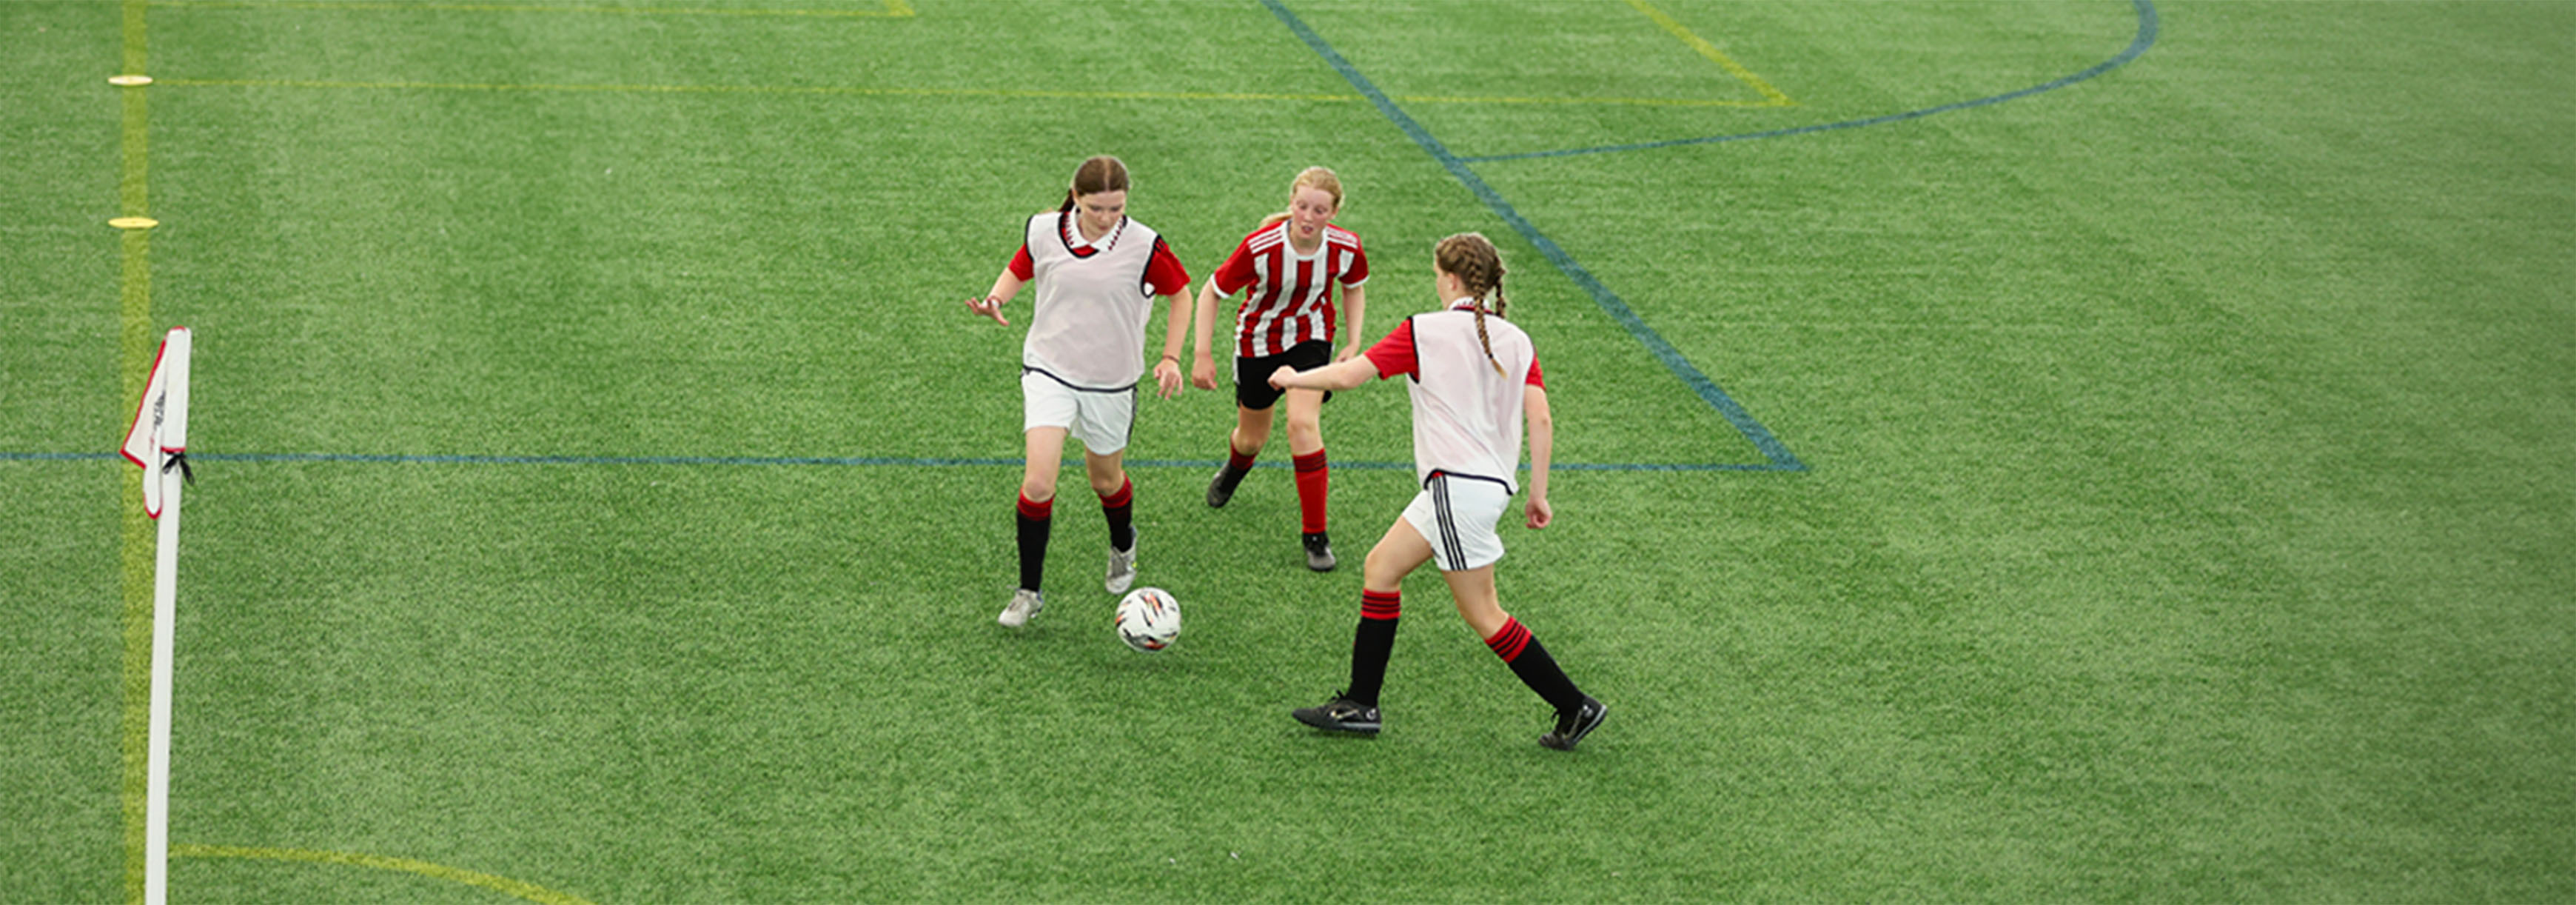 Two attackers combine out wide while a defender approaches to press the player in possession. 